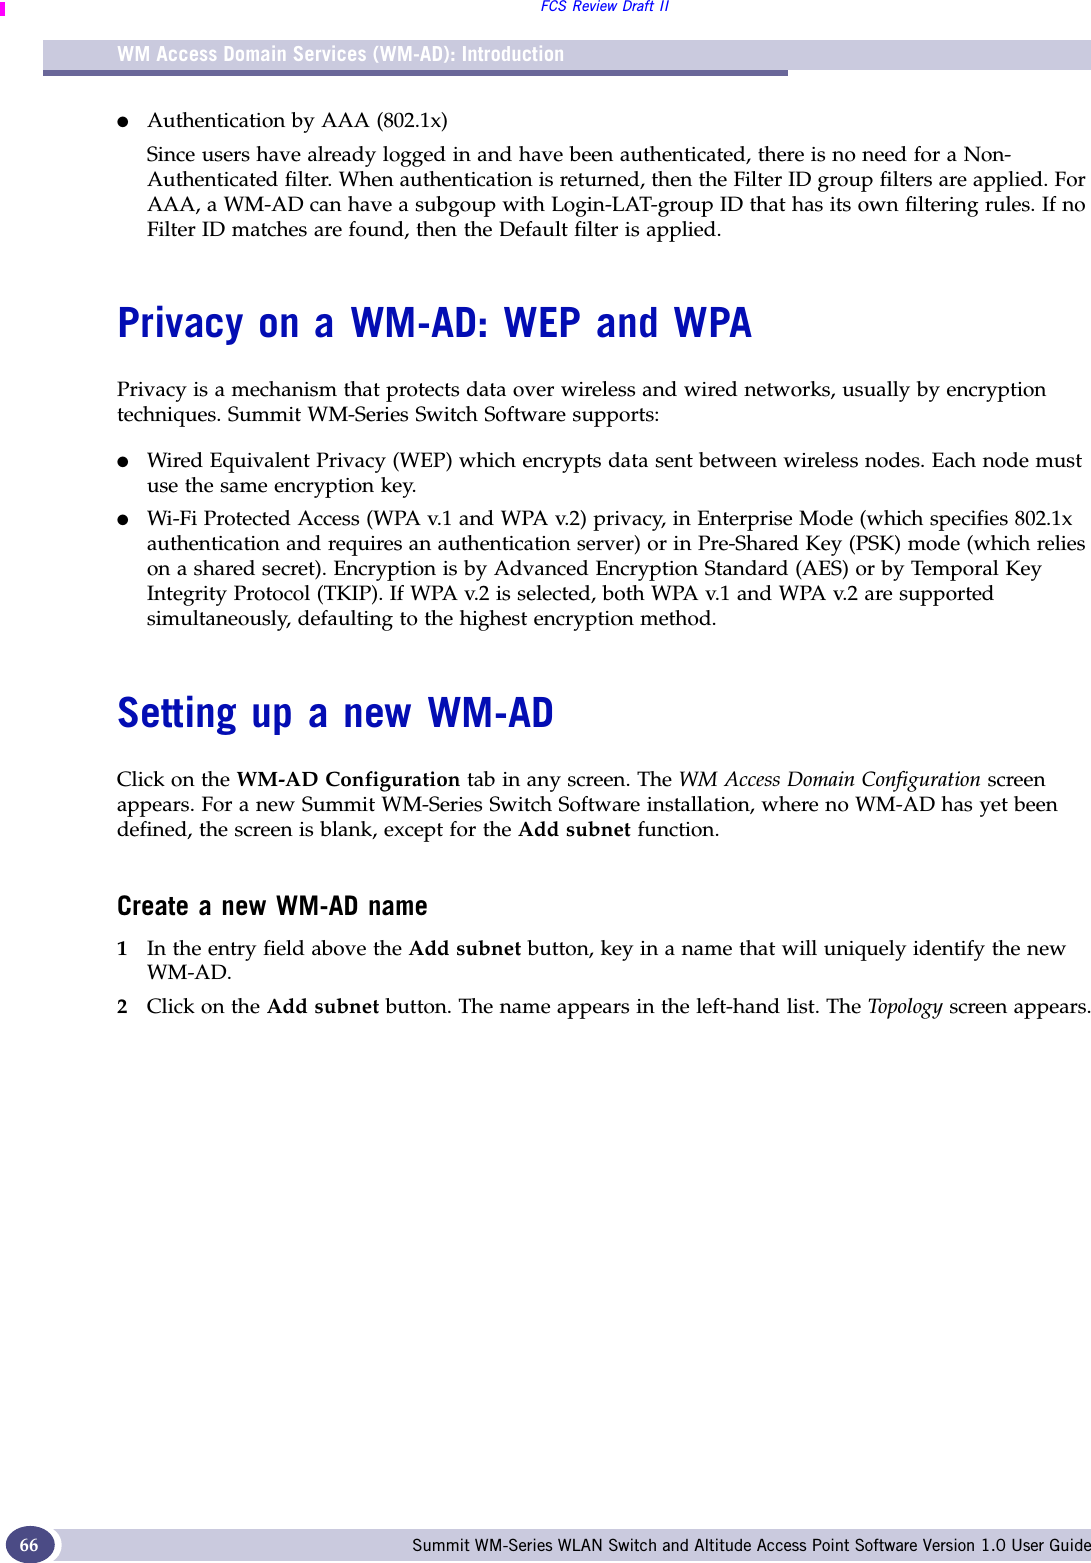 WM Access Domain Services (WM-AD): IntroductionFCS Review Draft IISummit WM-Series WLAN Switch and Altitude Access Point Software Version 1.0 User Guide66●Authentication by AAA (802.1x)Since users have already logged in and have been authenticated, there is no need for a Non-Authenticated filter. When authentication is returned, then the Filter ID group filters are applied. For AAA, a WM-AD can have a subgoup with Login-LAT-group ID that has its own filtering rules. If no Filter ID matches are found, then the Default filter is applied. Privacy on a WM-AD: WEP and WPAPrivacy is a mechanism that protects data over wireless and wired networks, usually by encryption techniques. Summit WM-Series Switch Software supports:●Wired Equivalent Privacy (WEP) which encrypts data sent between wireless nodes. Each node must use the same encryption key.●Wi-Fi Protected Access (WPA v.1 and WPA v.2) privacy, in Enterprise Mode (which specifies 802.1x authentication and requires an authentication server) or in Pre-Shared Key (PSK) mode (which relies on a shared secret). Encryption is by Advanced Encryption Standard (AES) or by Temporal Key Integrity Protocol (TKIP). If WPA v.2 is selected, both WPA v.1 and WPA v.2 are supported simultaneously, defaulting to the highest encryption method.Setting up a new WM-ADClick on the WM-AD Configuration tab in any screen. The WM Access Domain Configuration screen appears. For a new Summit WM-Series Switch Software installation, where no WM-AD has yet been defined, the screen is blank, except for the Add subnet function.Create a new WM-AD name1In the entry field above the Add subnet button, key in a name that will uniquely identify the new WM-AD.2Click on the Add subnet button. The name appears in the left-hand list. The Top olo gy screen appears.